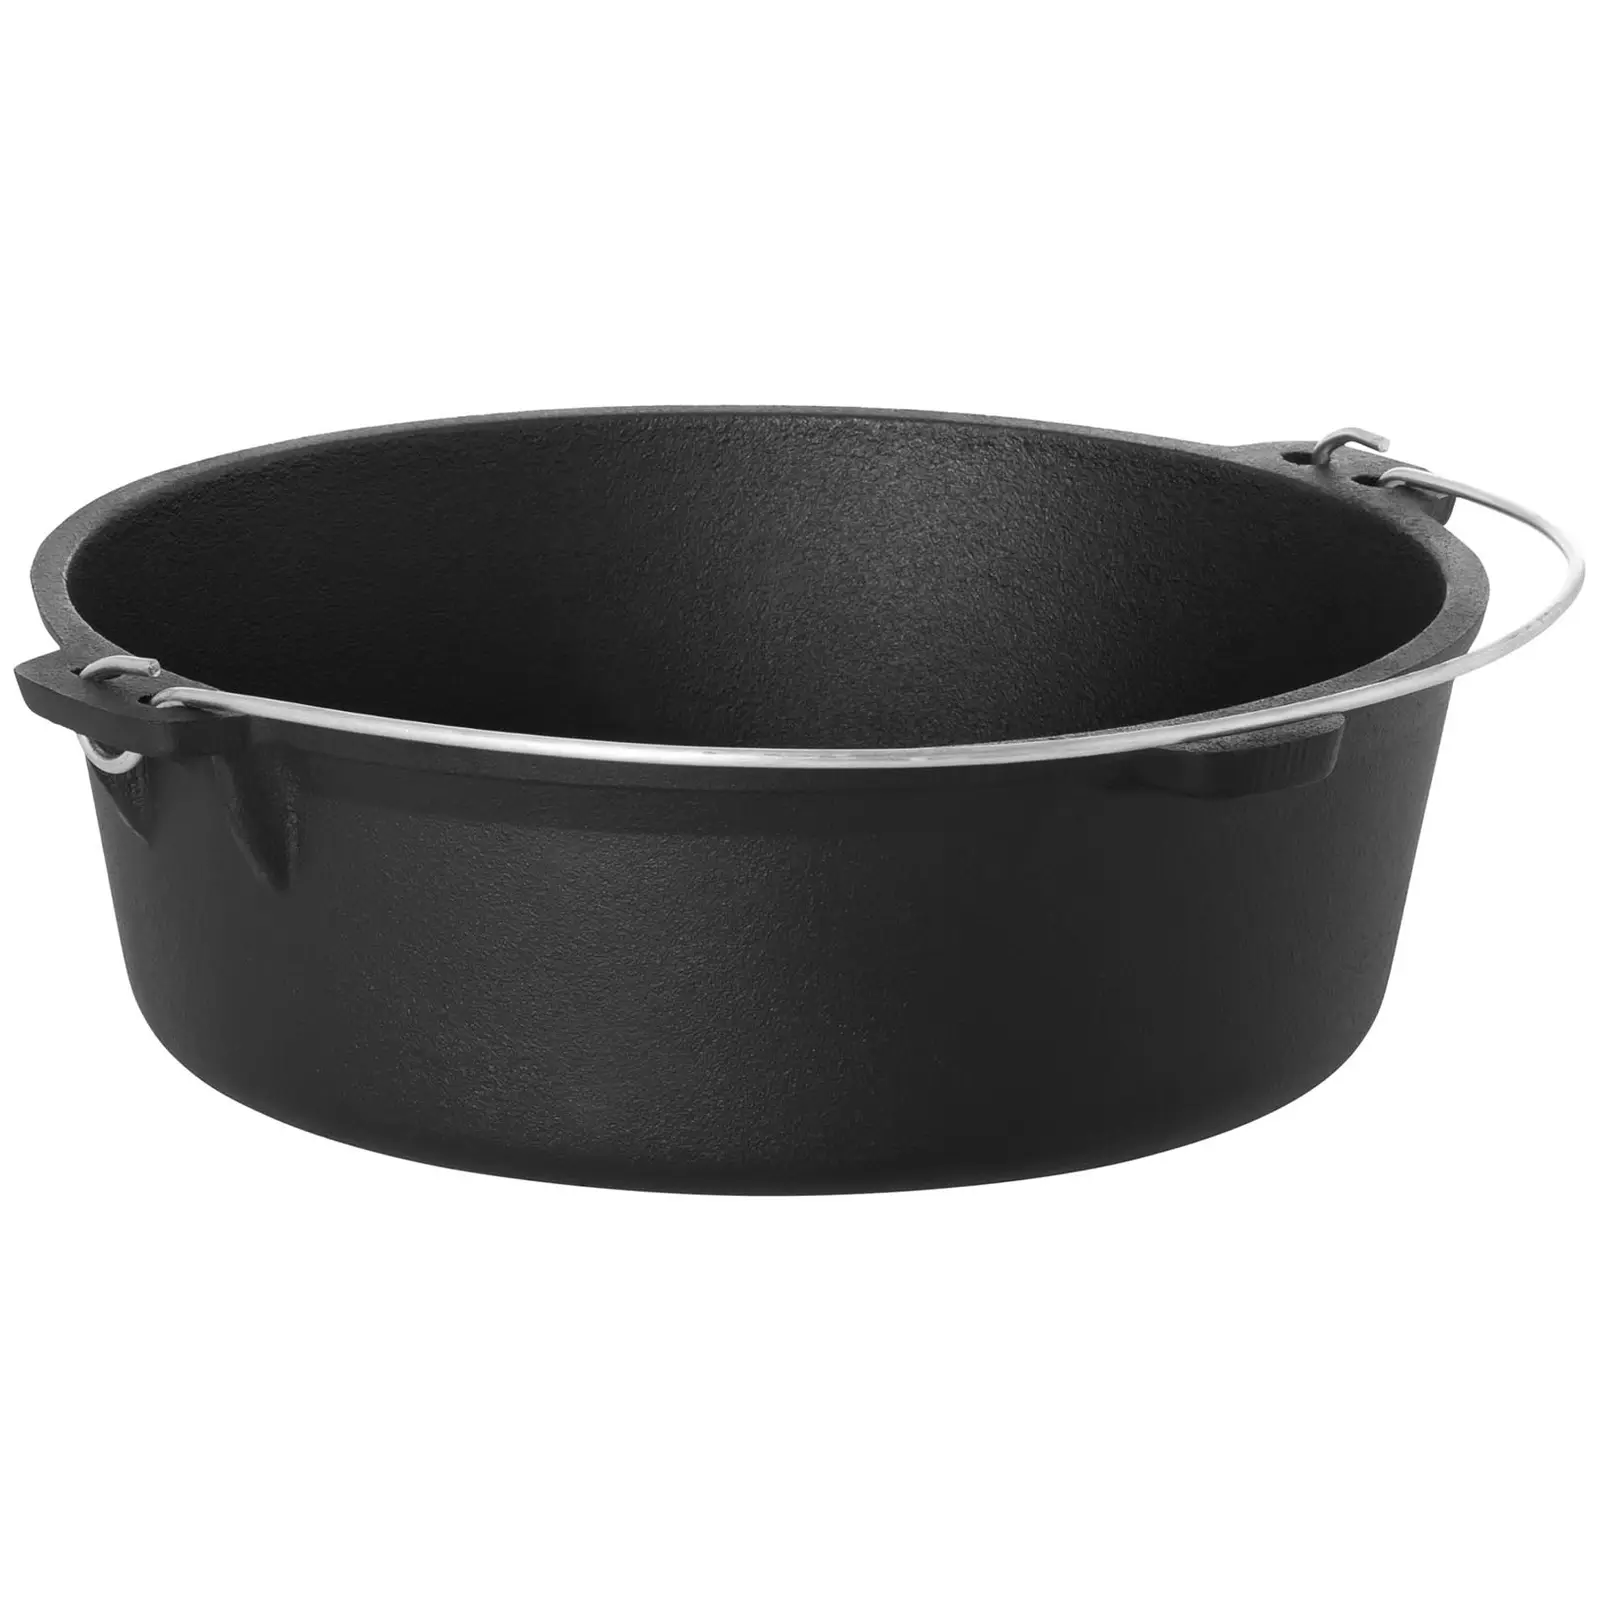 Cast Iron Dutch Oven with Stand - 6 litres